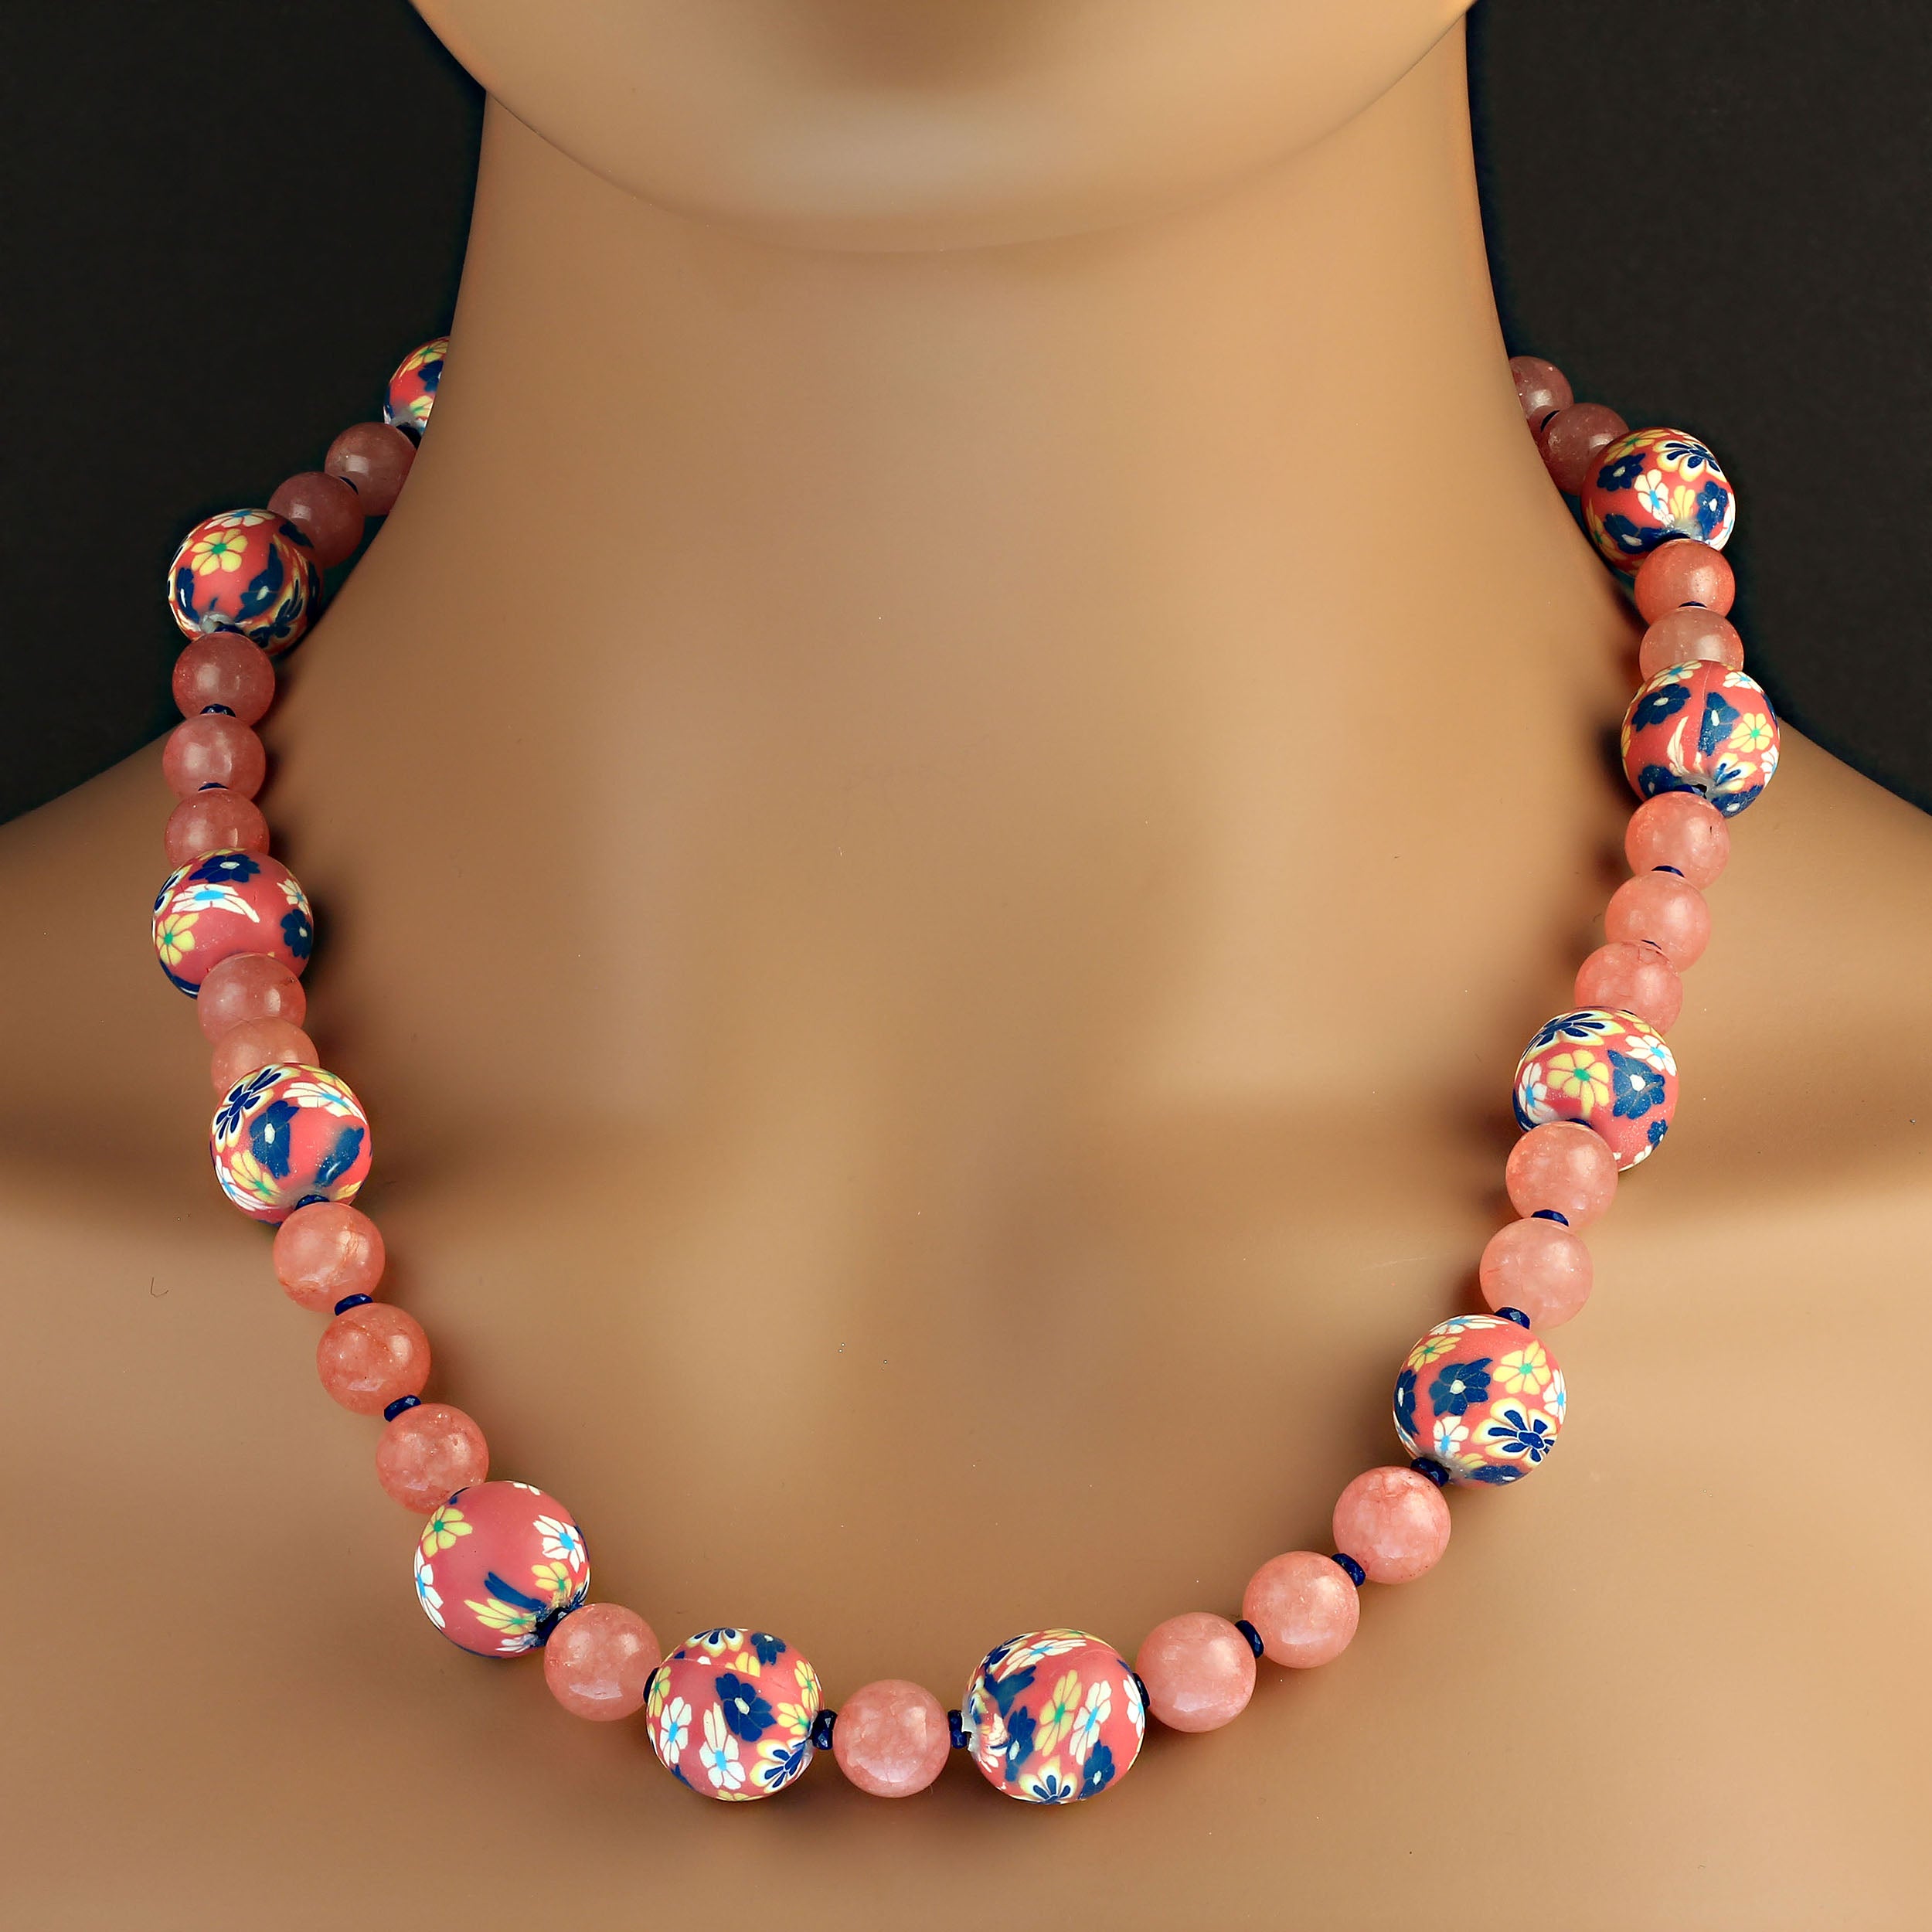 AJD Perfect Spring / Summer Necklace in Pink Agate and Fun Chinese Beads For Sale